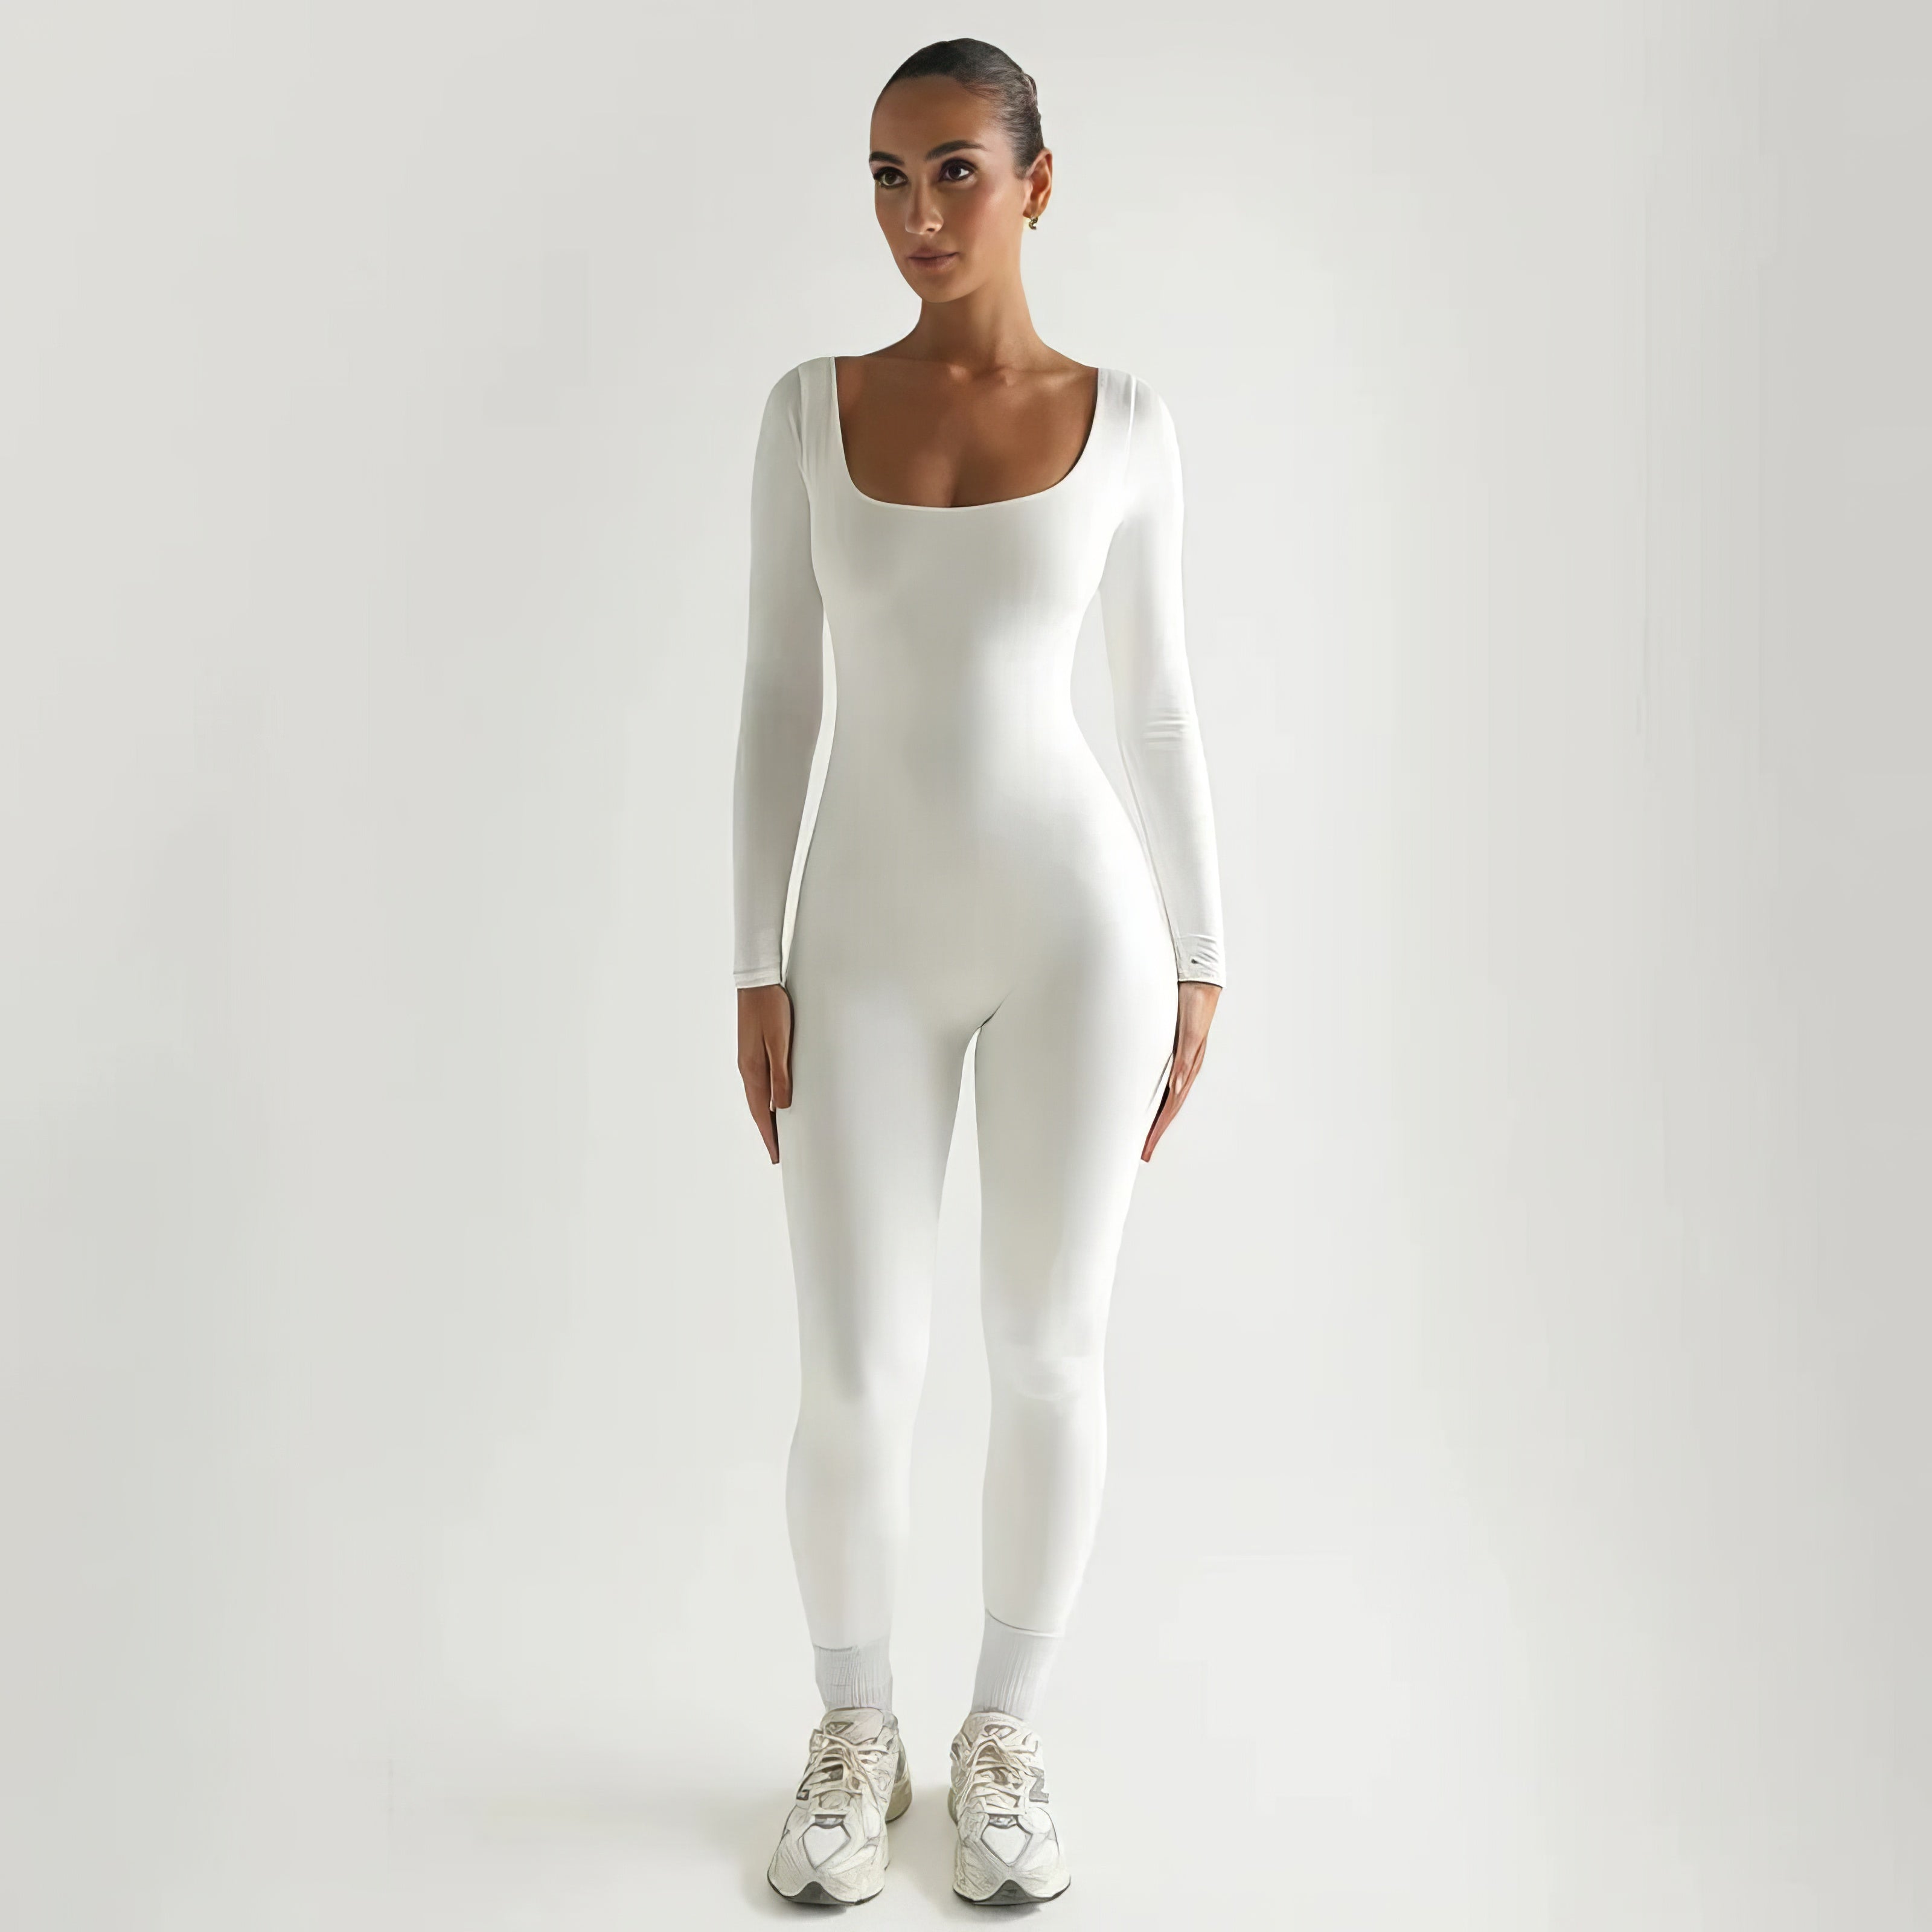 Cleo | Sleek & Supportive Fitness Jumpsuit